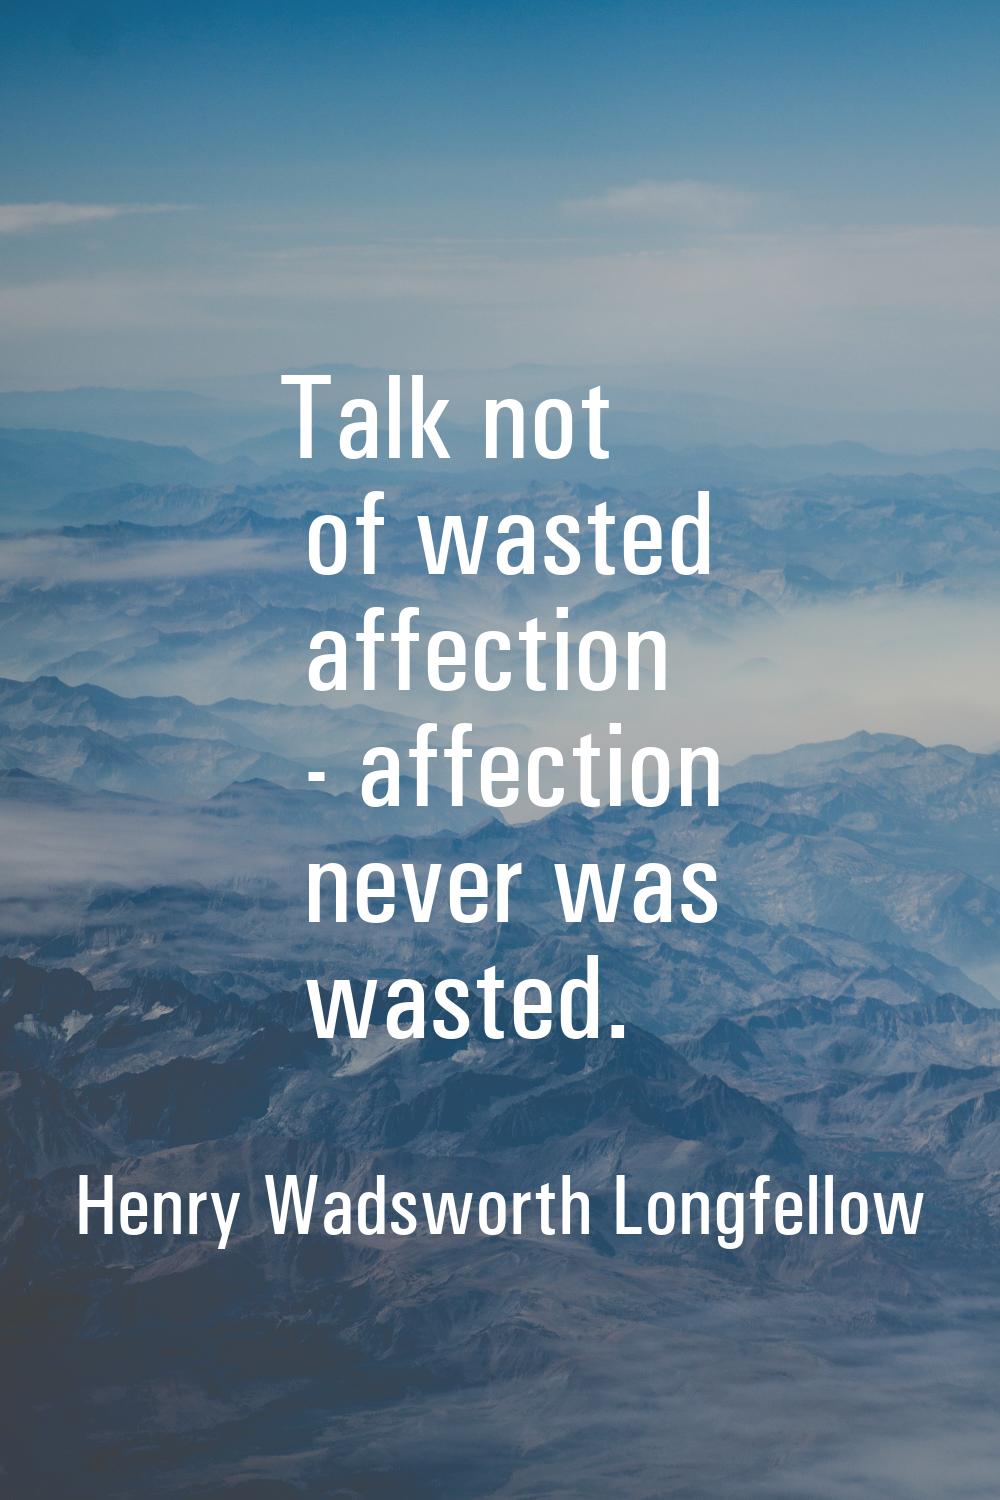 Talk not of wasted affection - affection never was wasted.